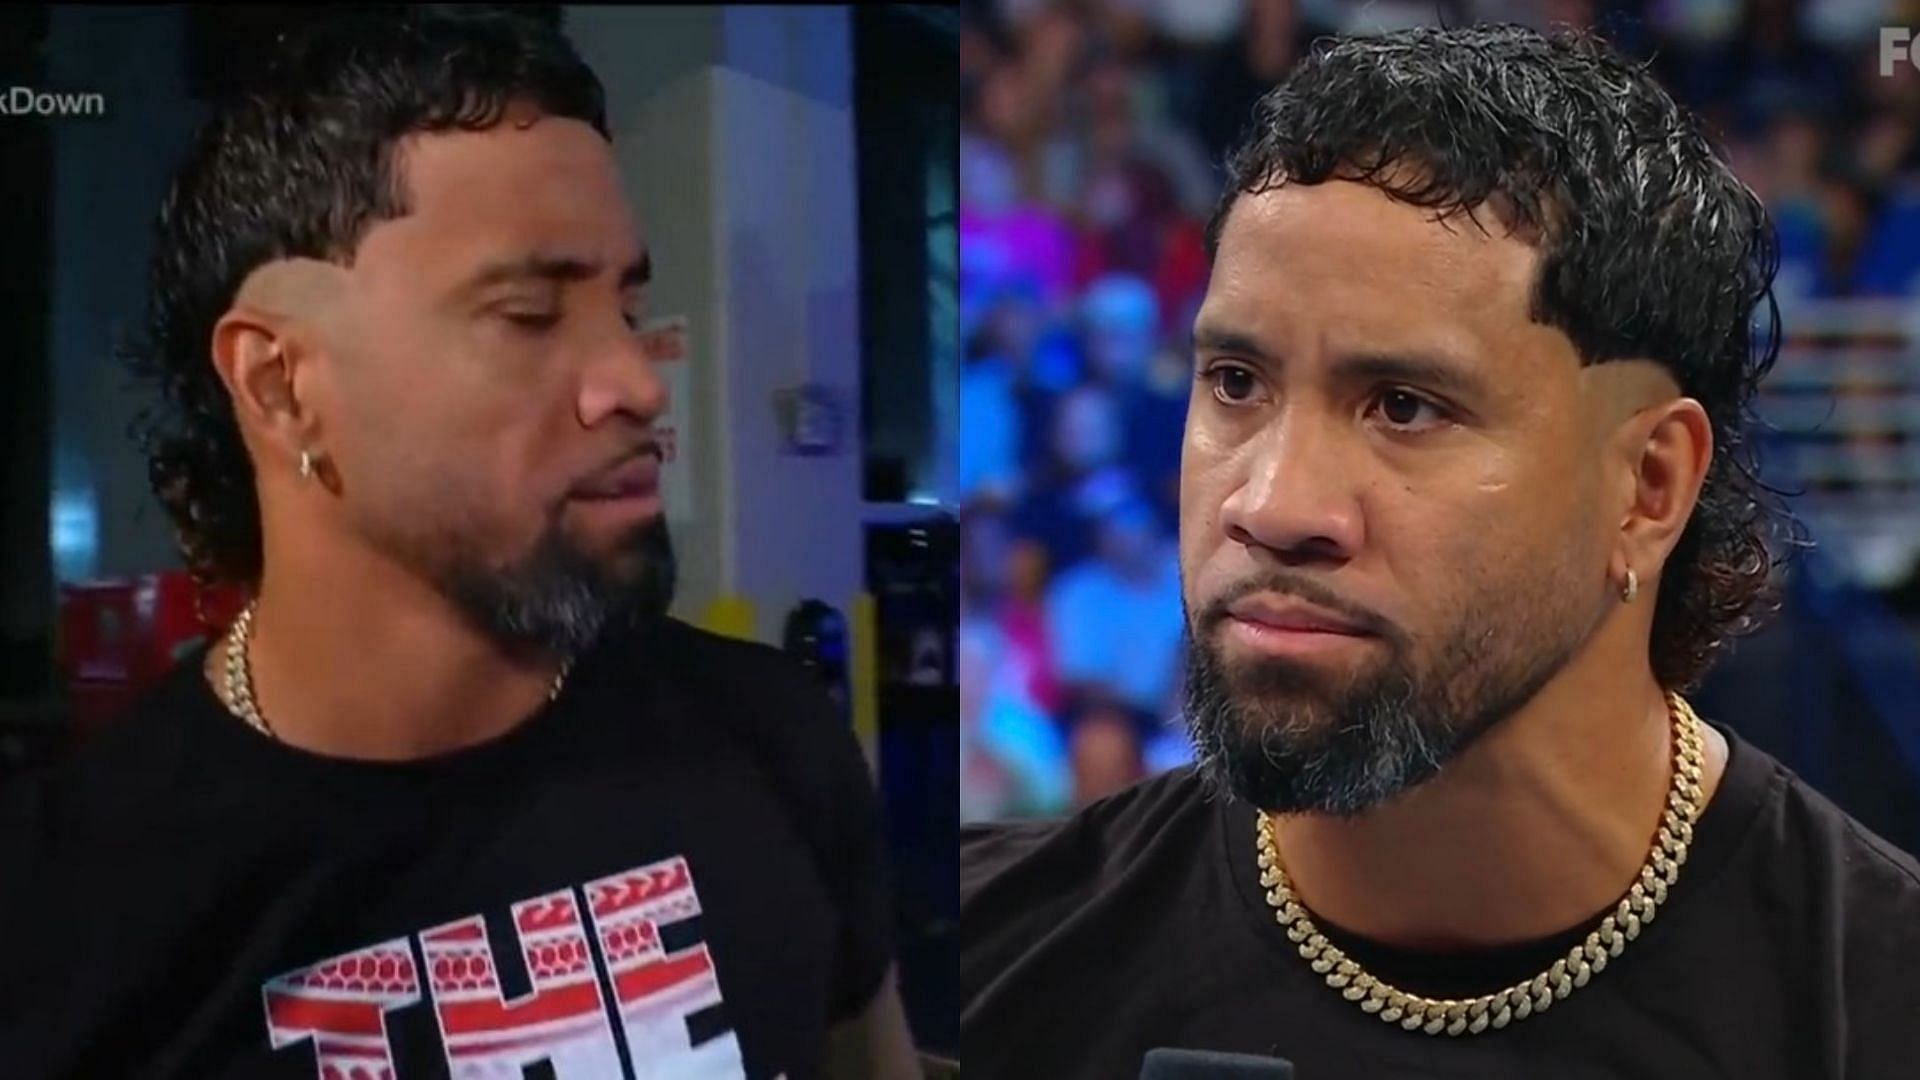 Jimmy Uso cost Jey the Undisputed WWE Universal Championship